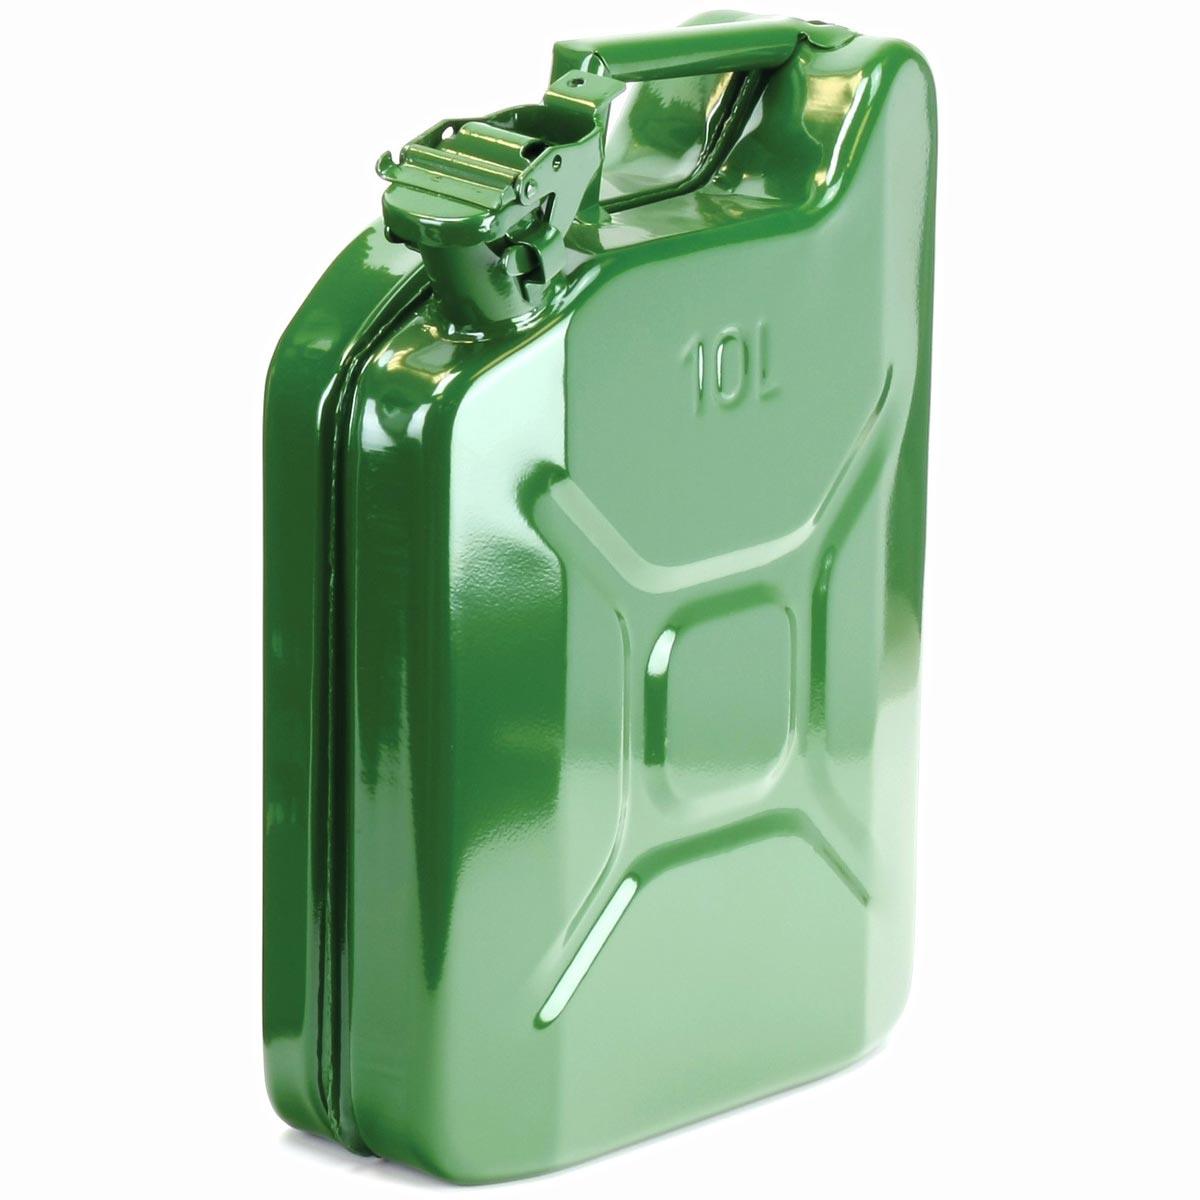 Bike It Fuel Jerry Can 10 Litres - Green - Browse our range of Accessories: Travel - getgearedshop 